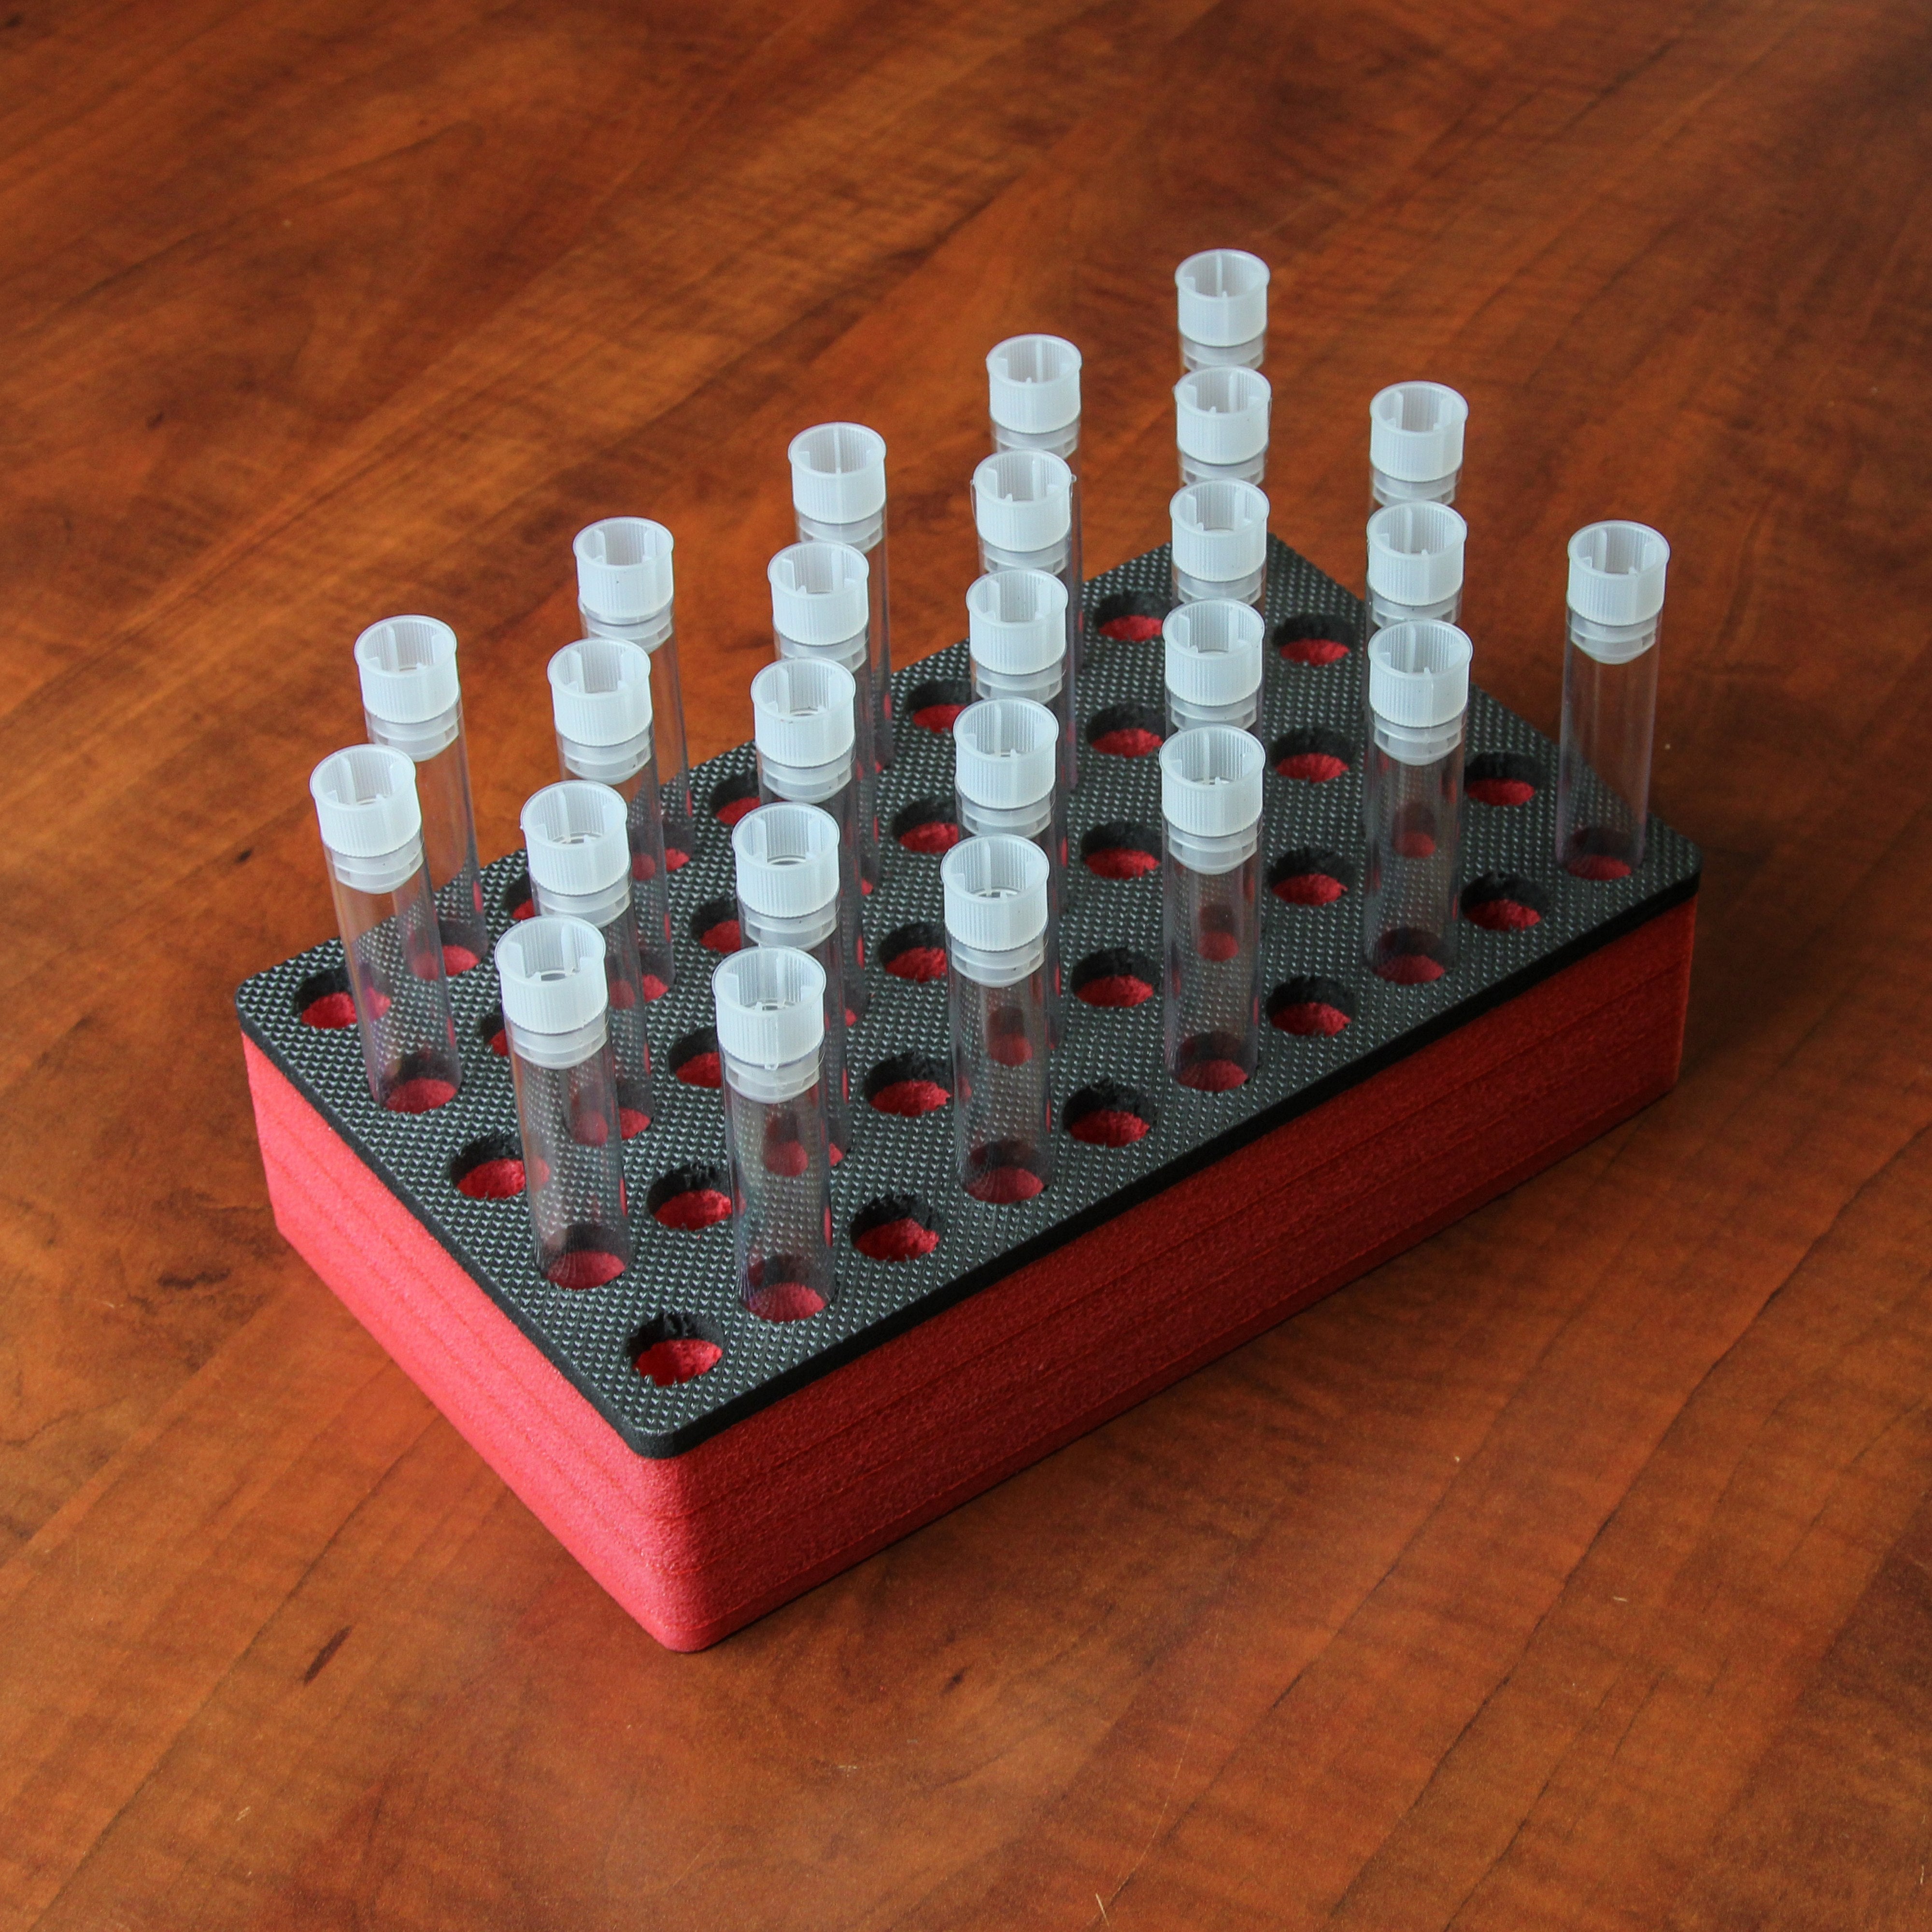 Polar Whale Test Tube Rack Red and Black Foam Storage Rack Organizer Stand Transport Holds 50 Tubes Each Fits up to 16mm Diameter Tubes